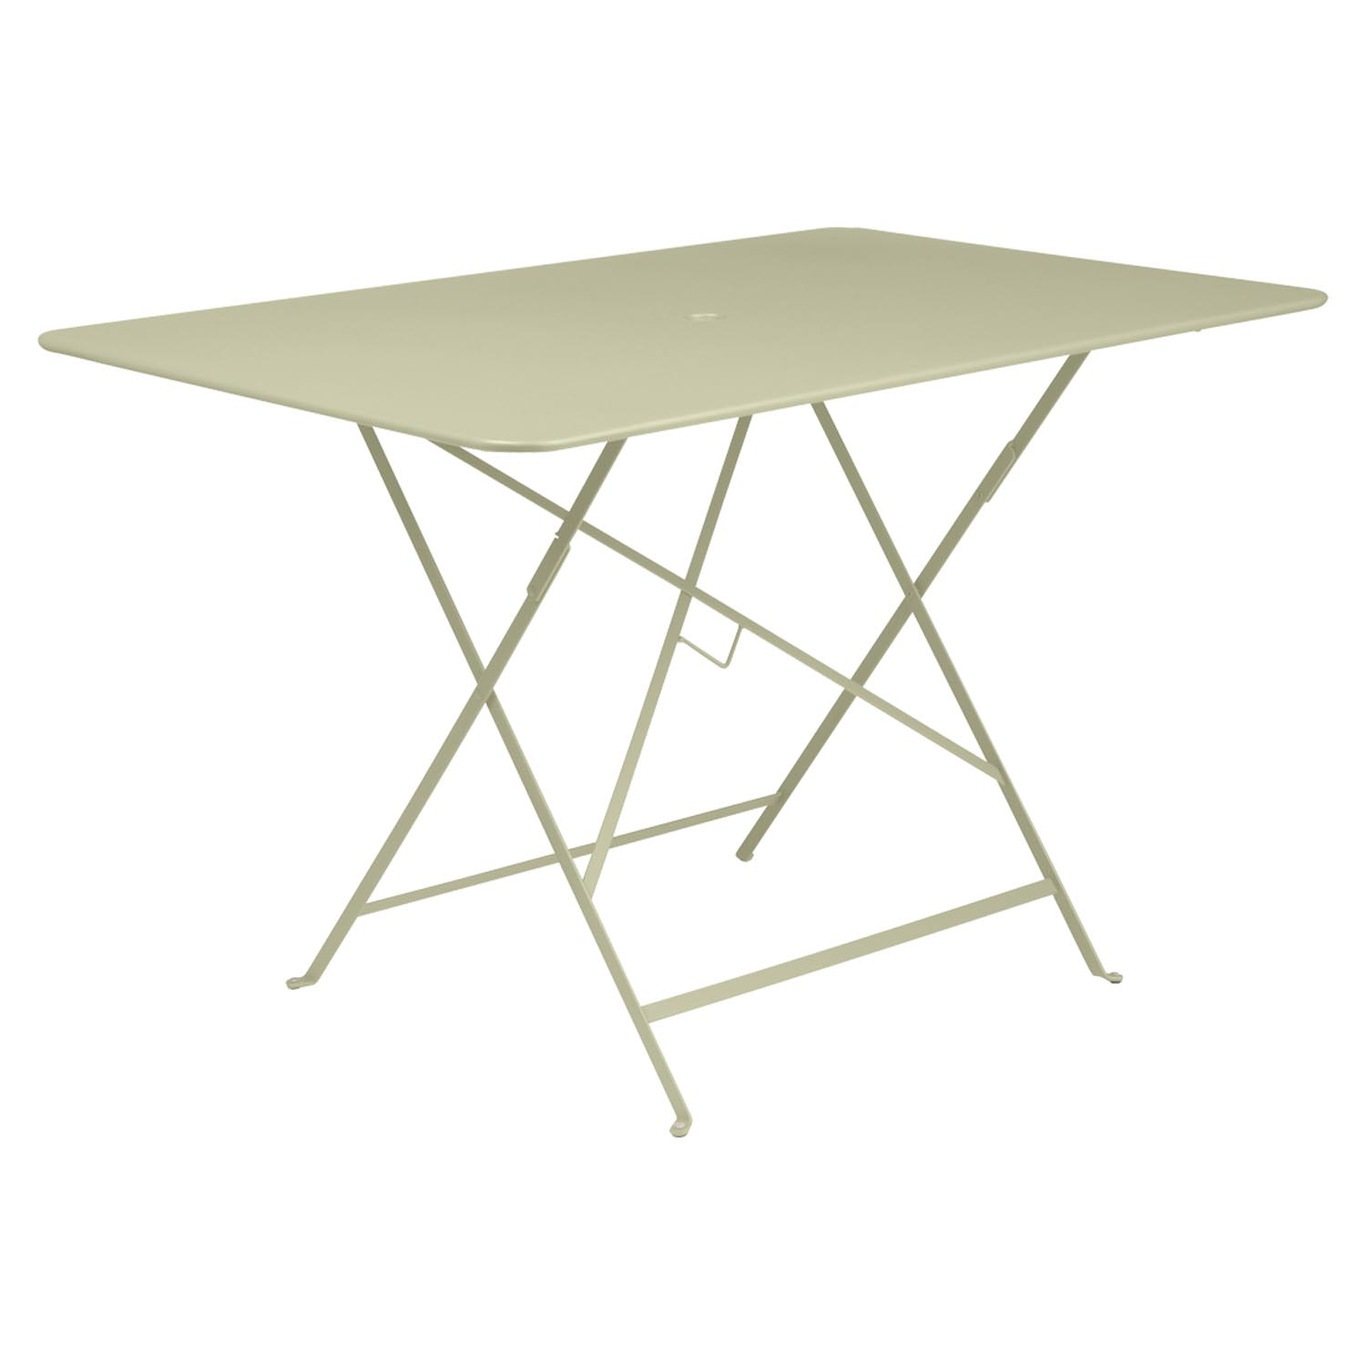 Bistro Table 117x77, Willow Green